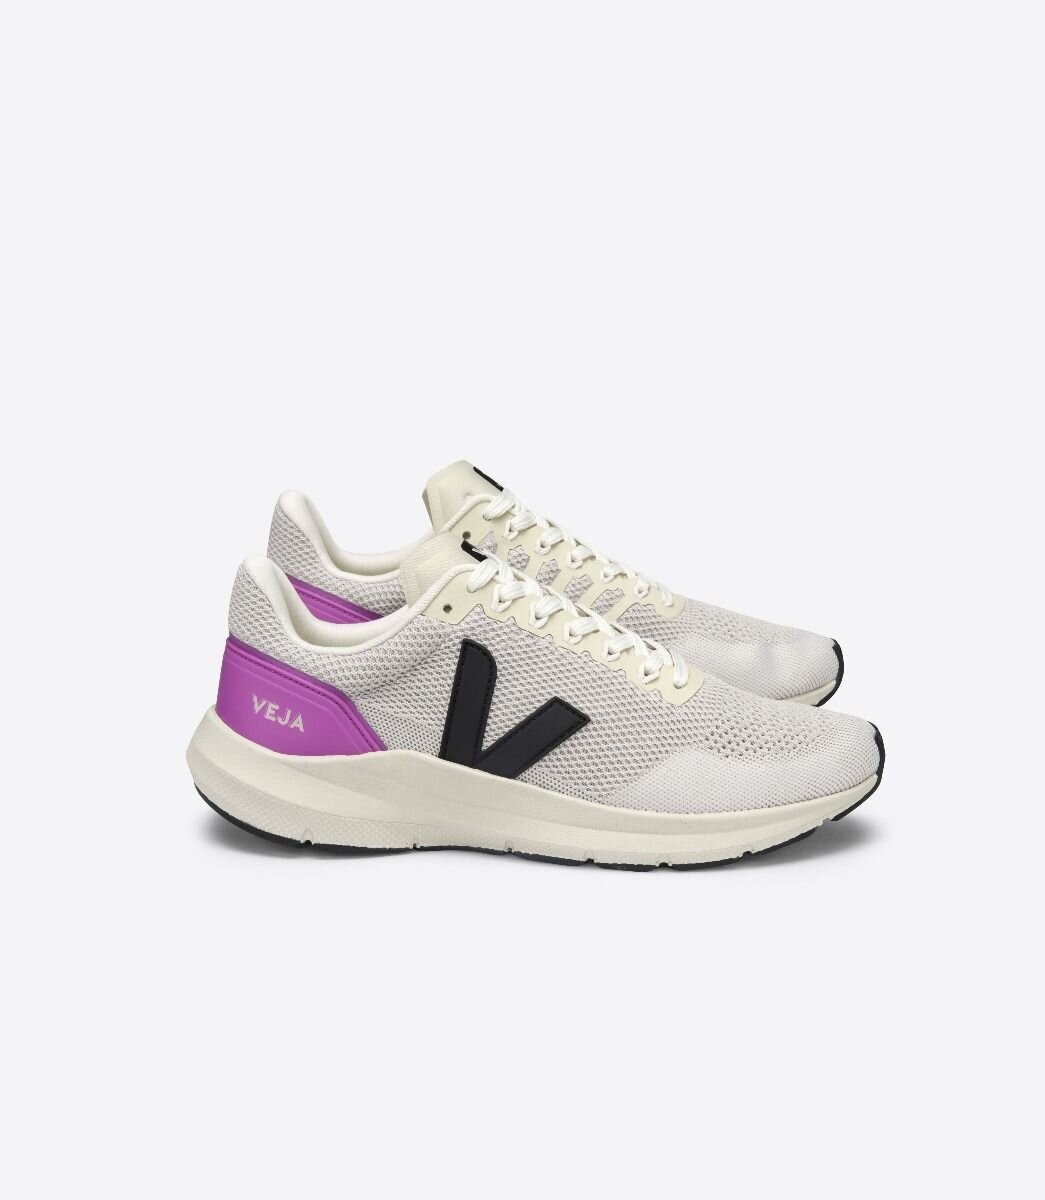 Veja's New Running Sneakers Are So Cool — The Outlet